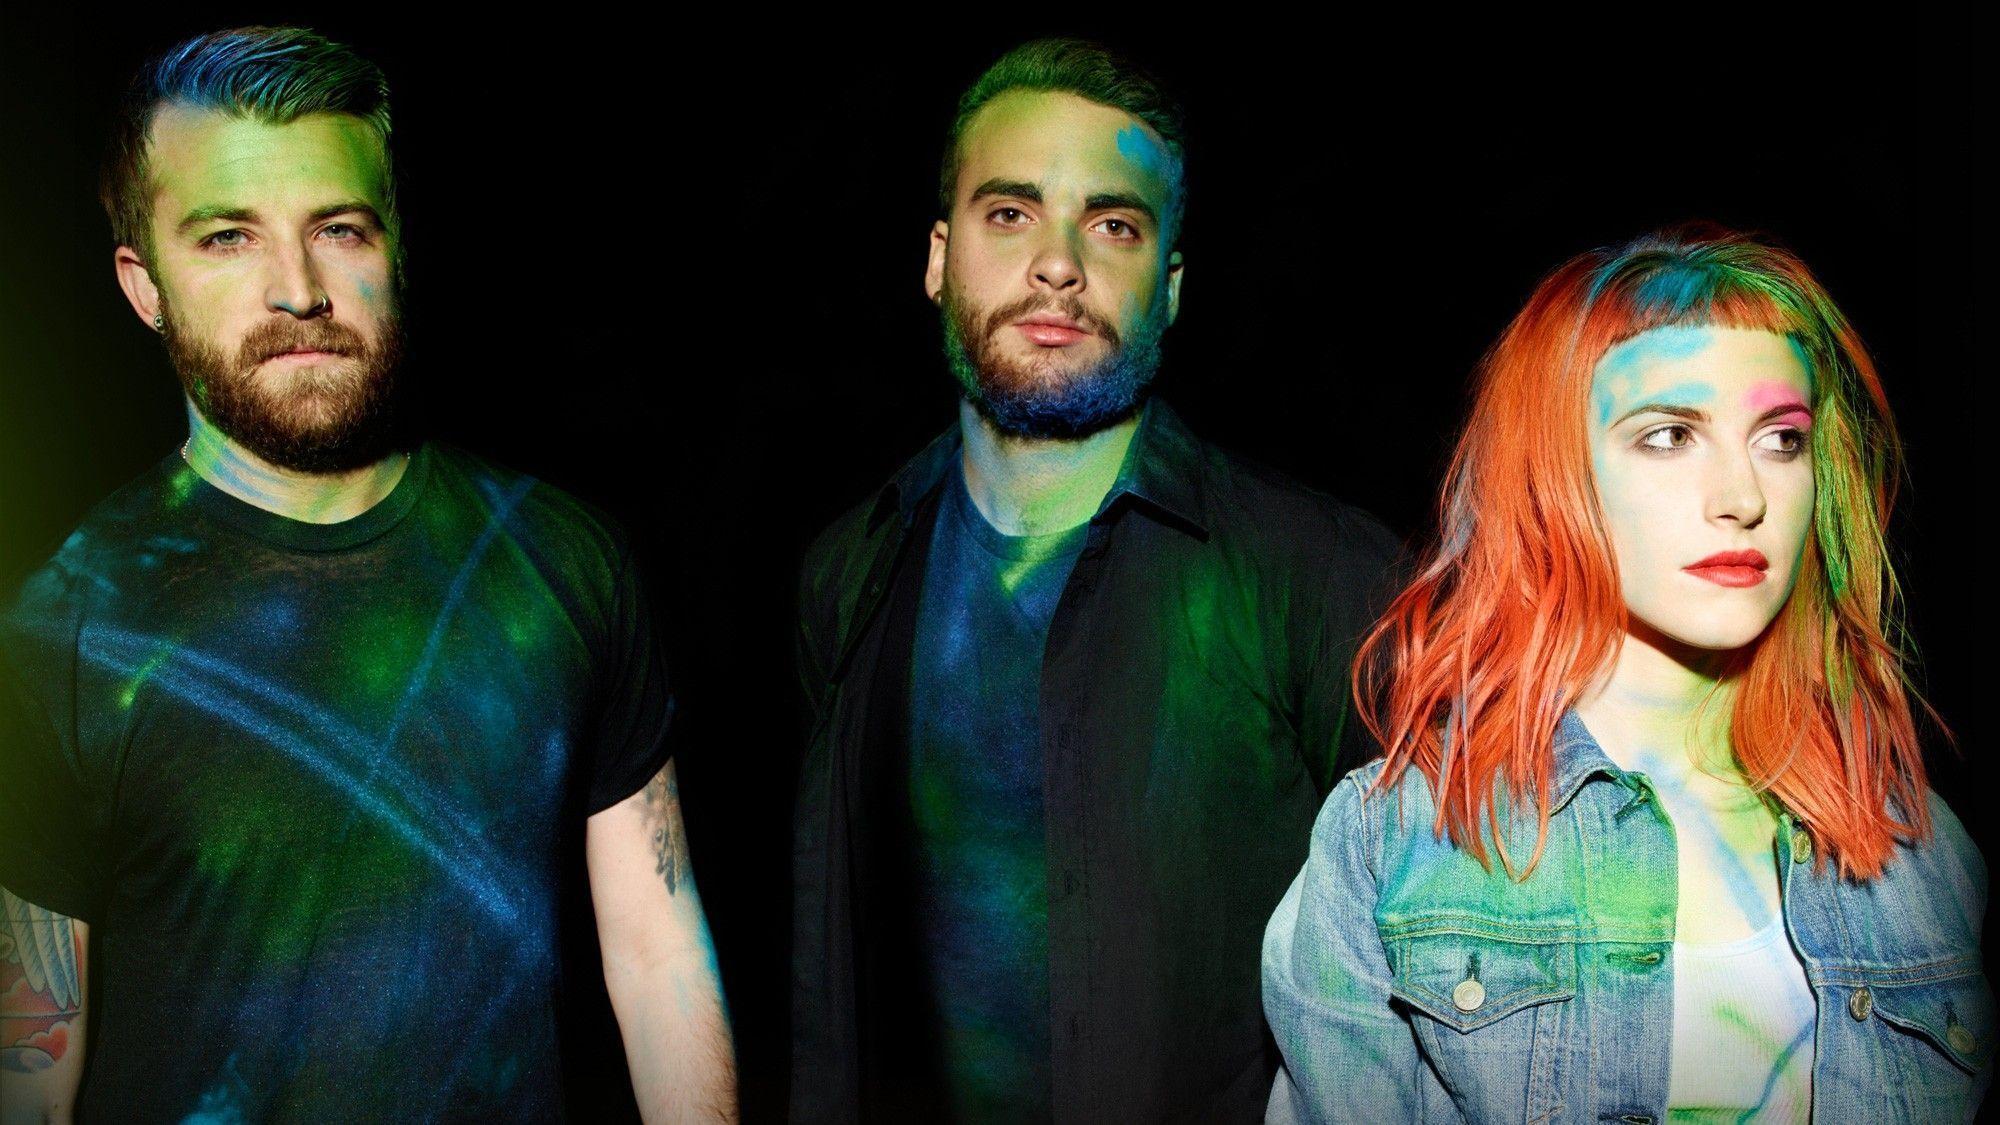 Paramore&;s Hayley Williams Ties Up Self Titled Album Run In New